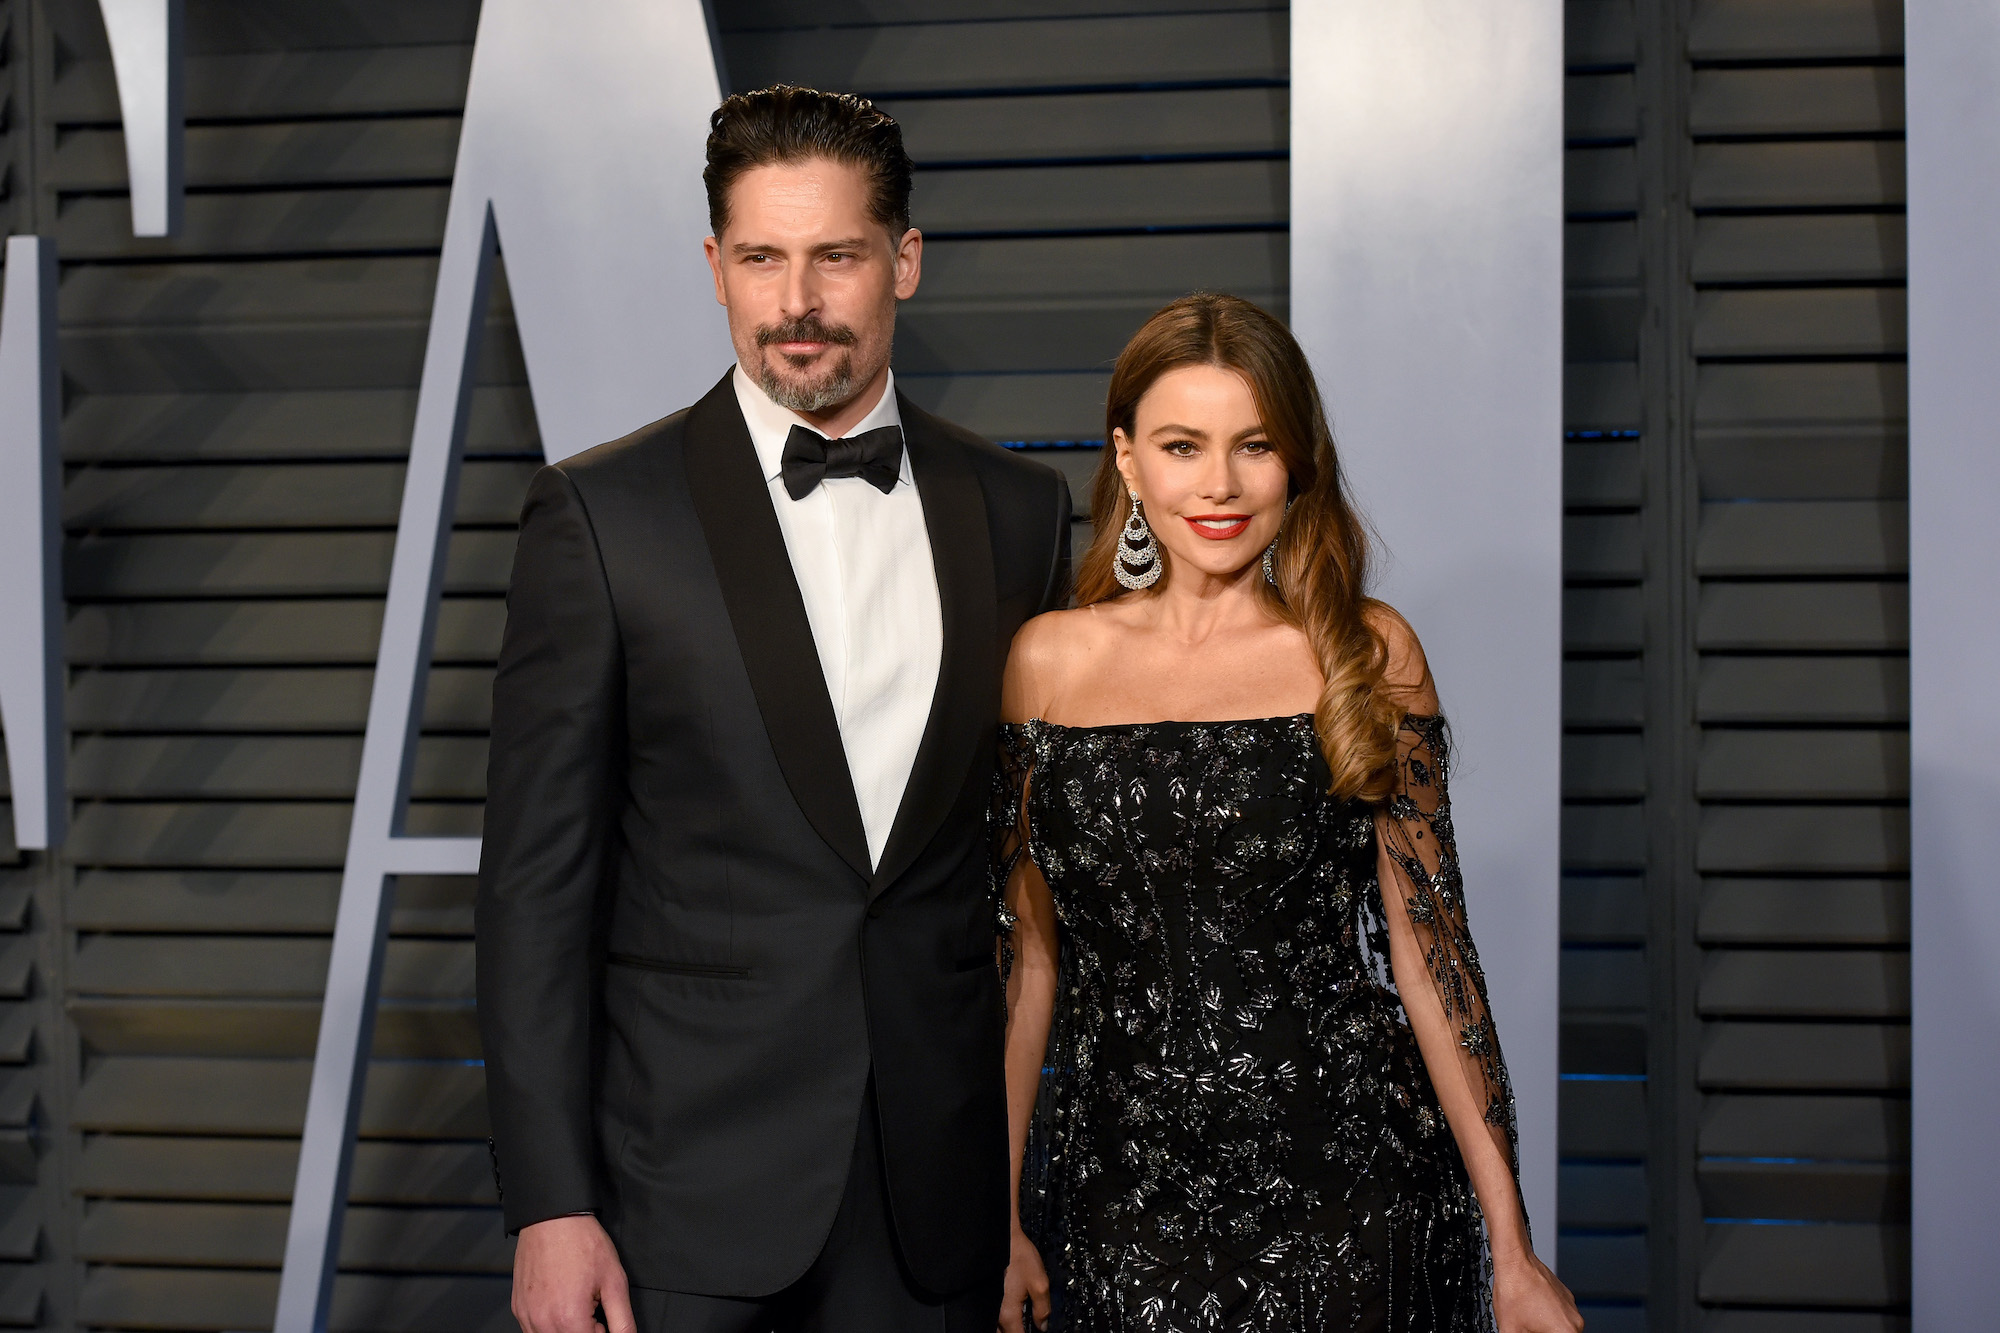 (L-R) Joe Manganiello and Sofia Vergara smiling in front of a gray background